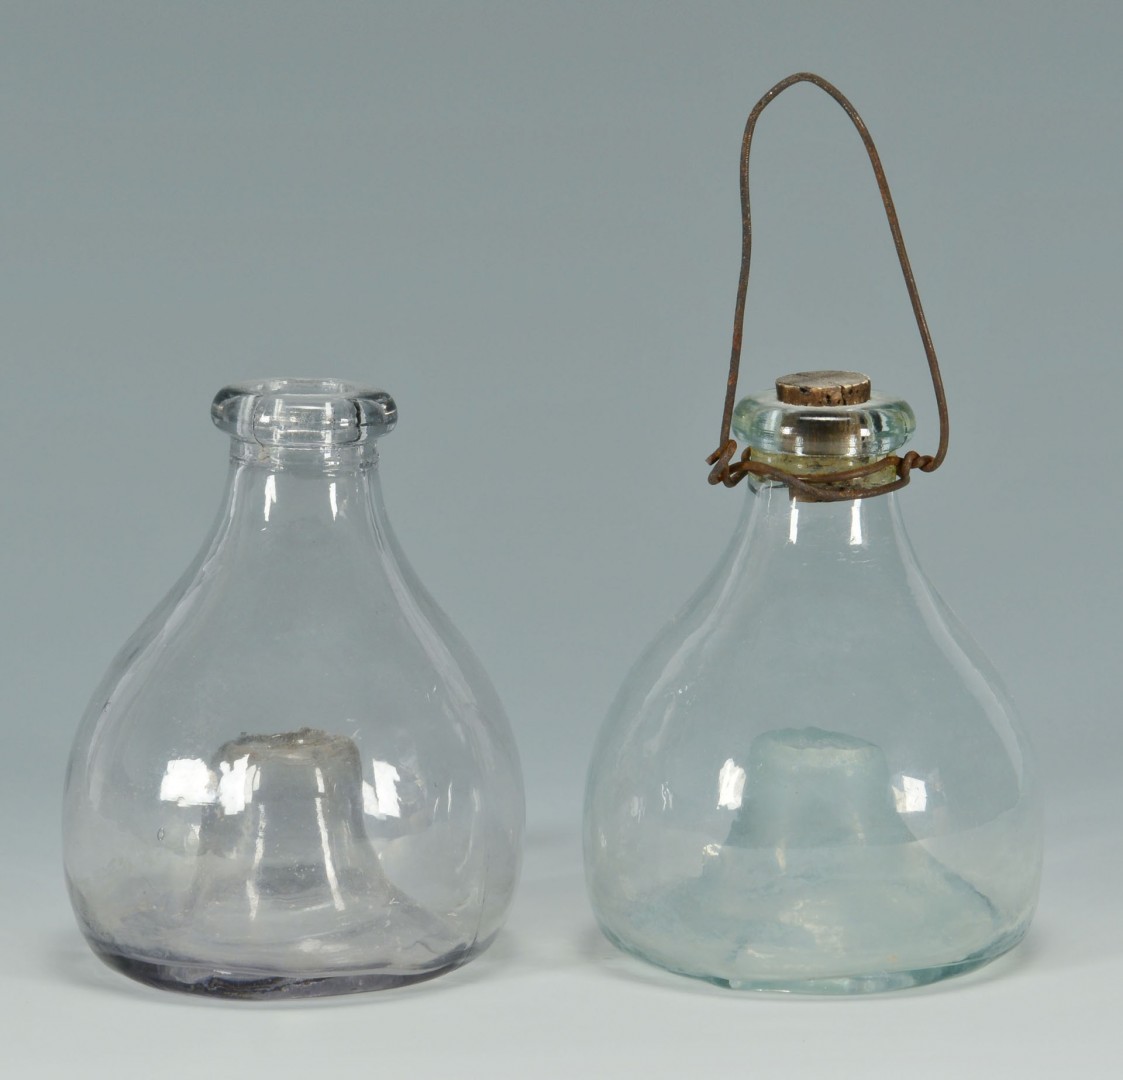 Lot 528: Two early blown glass fly catchers